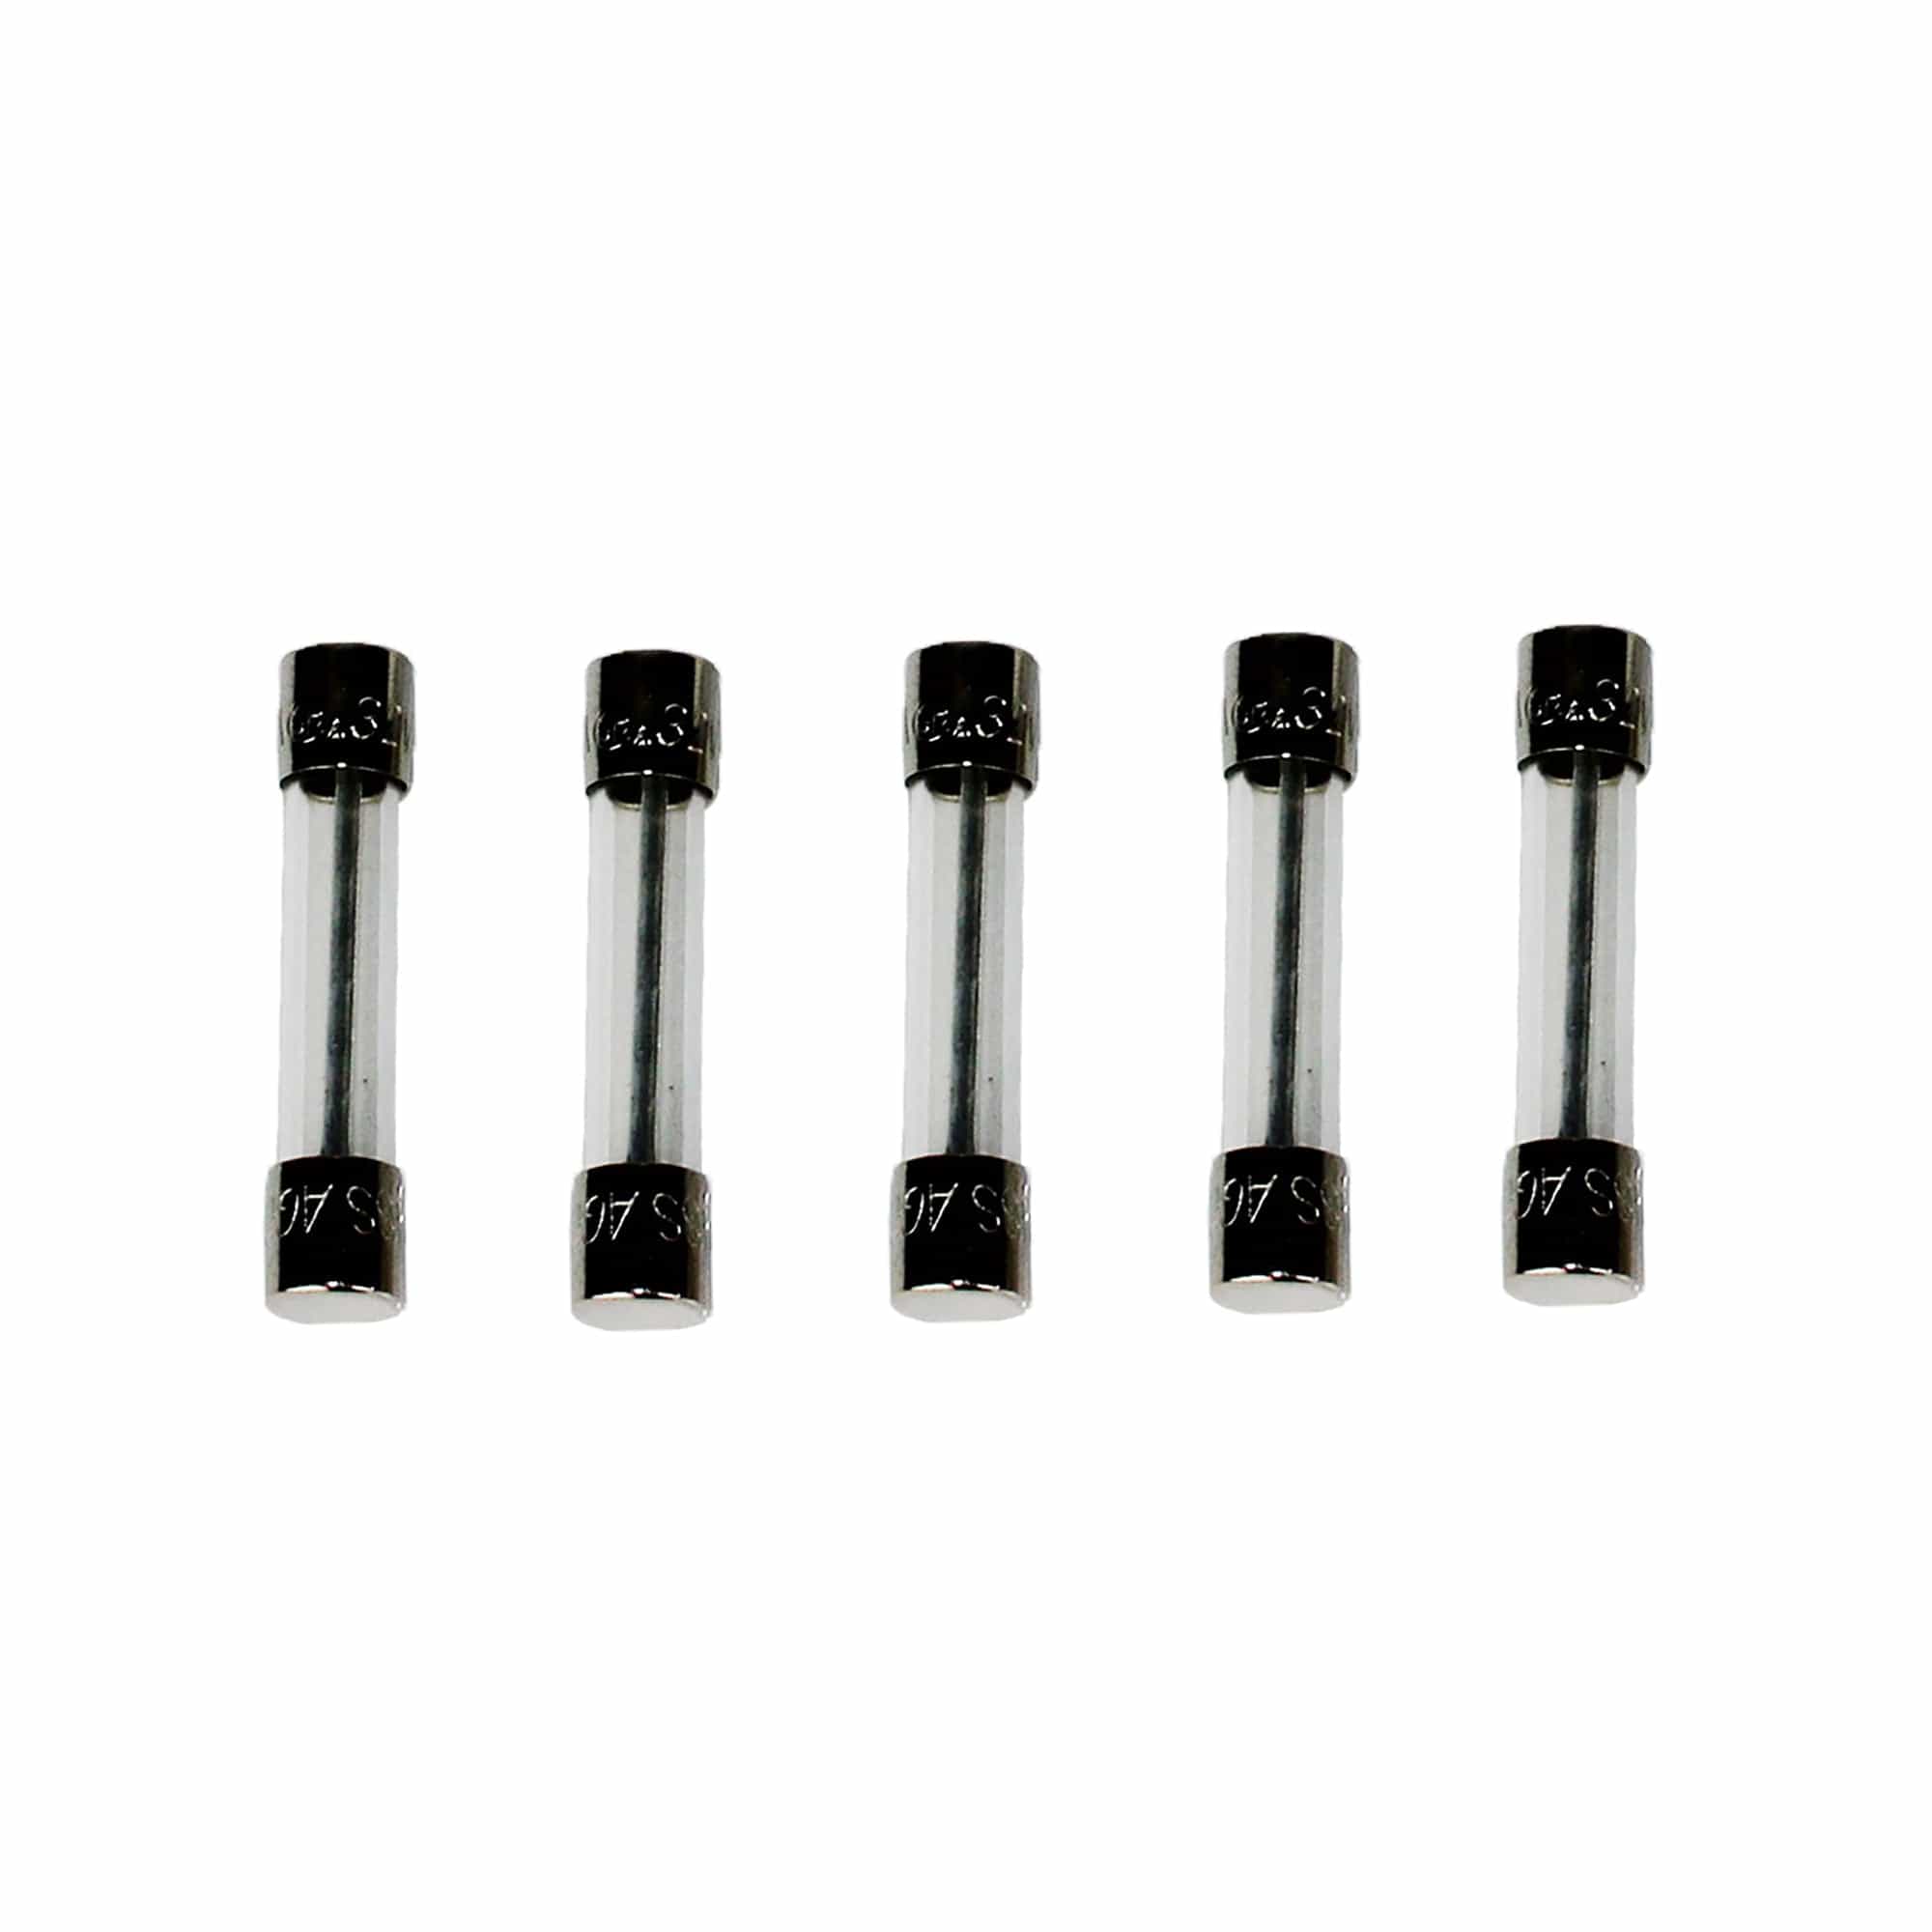 Blue Sea Systems 5220-BSS AGC 30A Fuse, 5 Pack